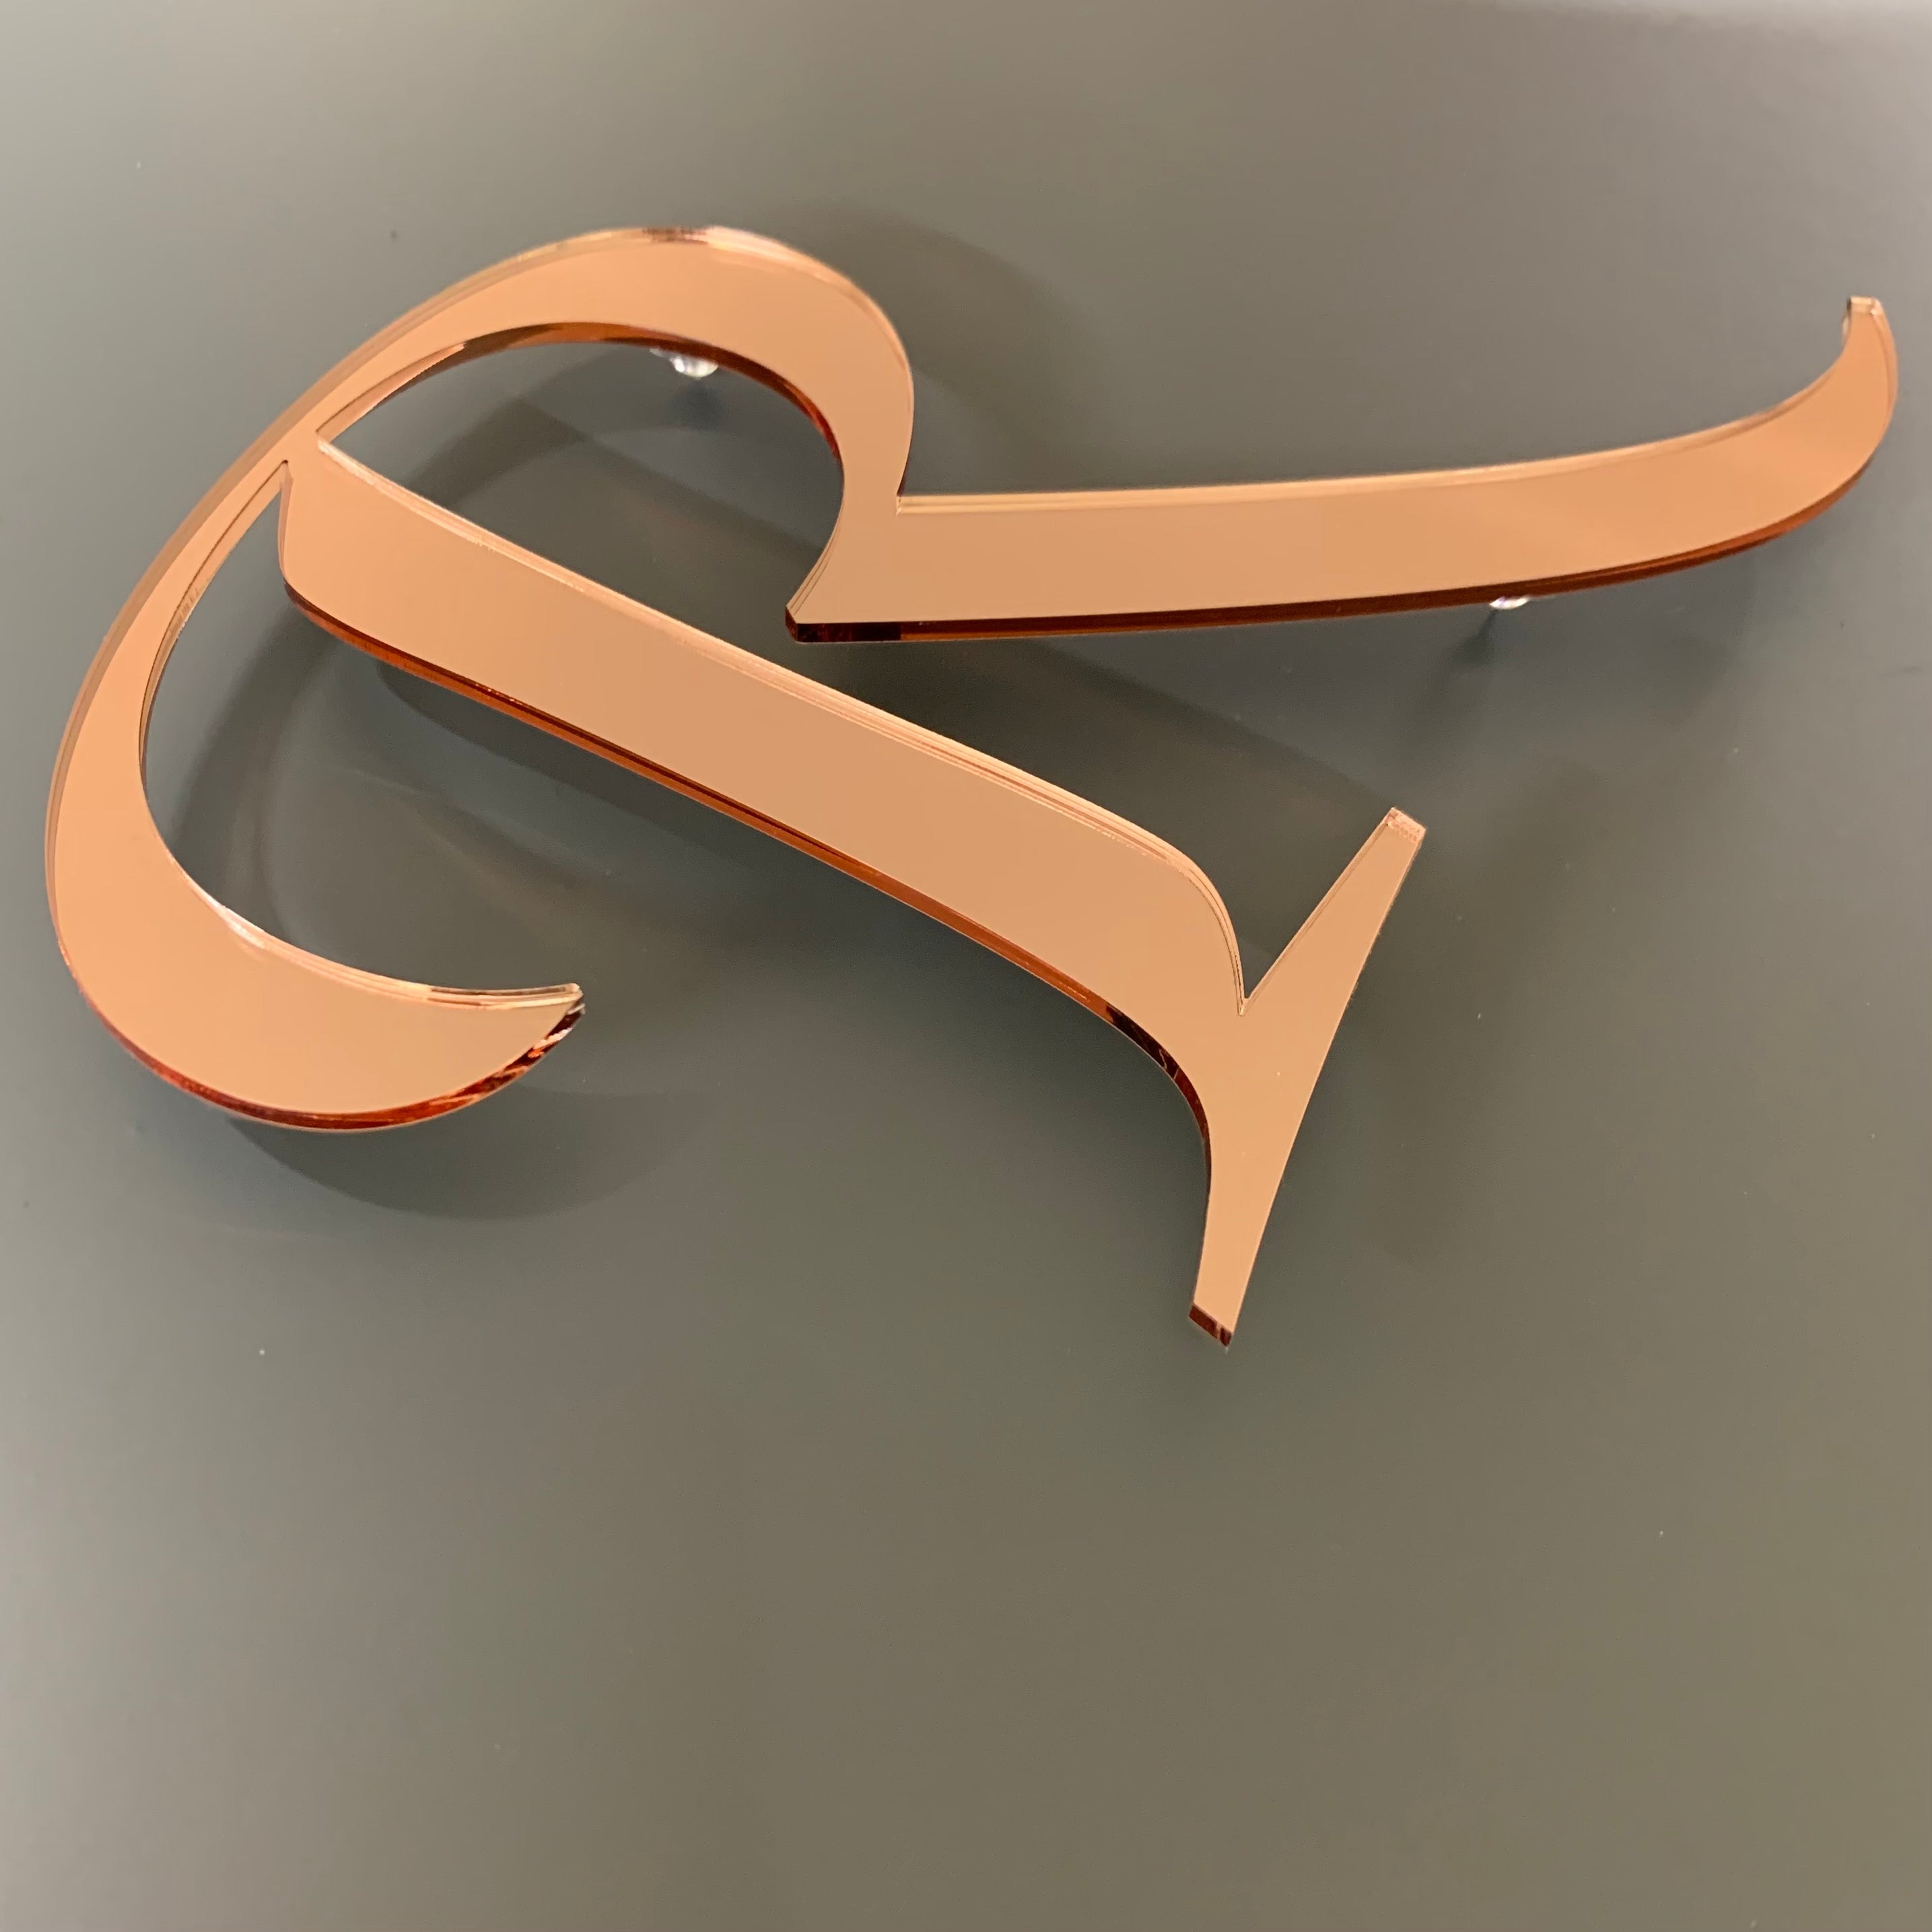 3mm Laser Cut Letters - Mirrored Gold & Rose Gold